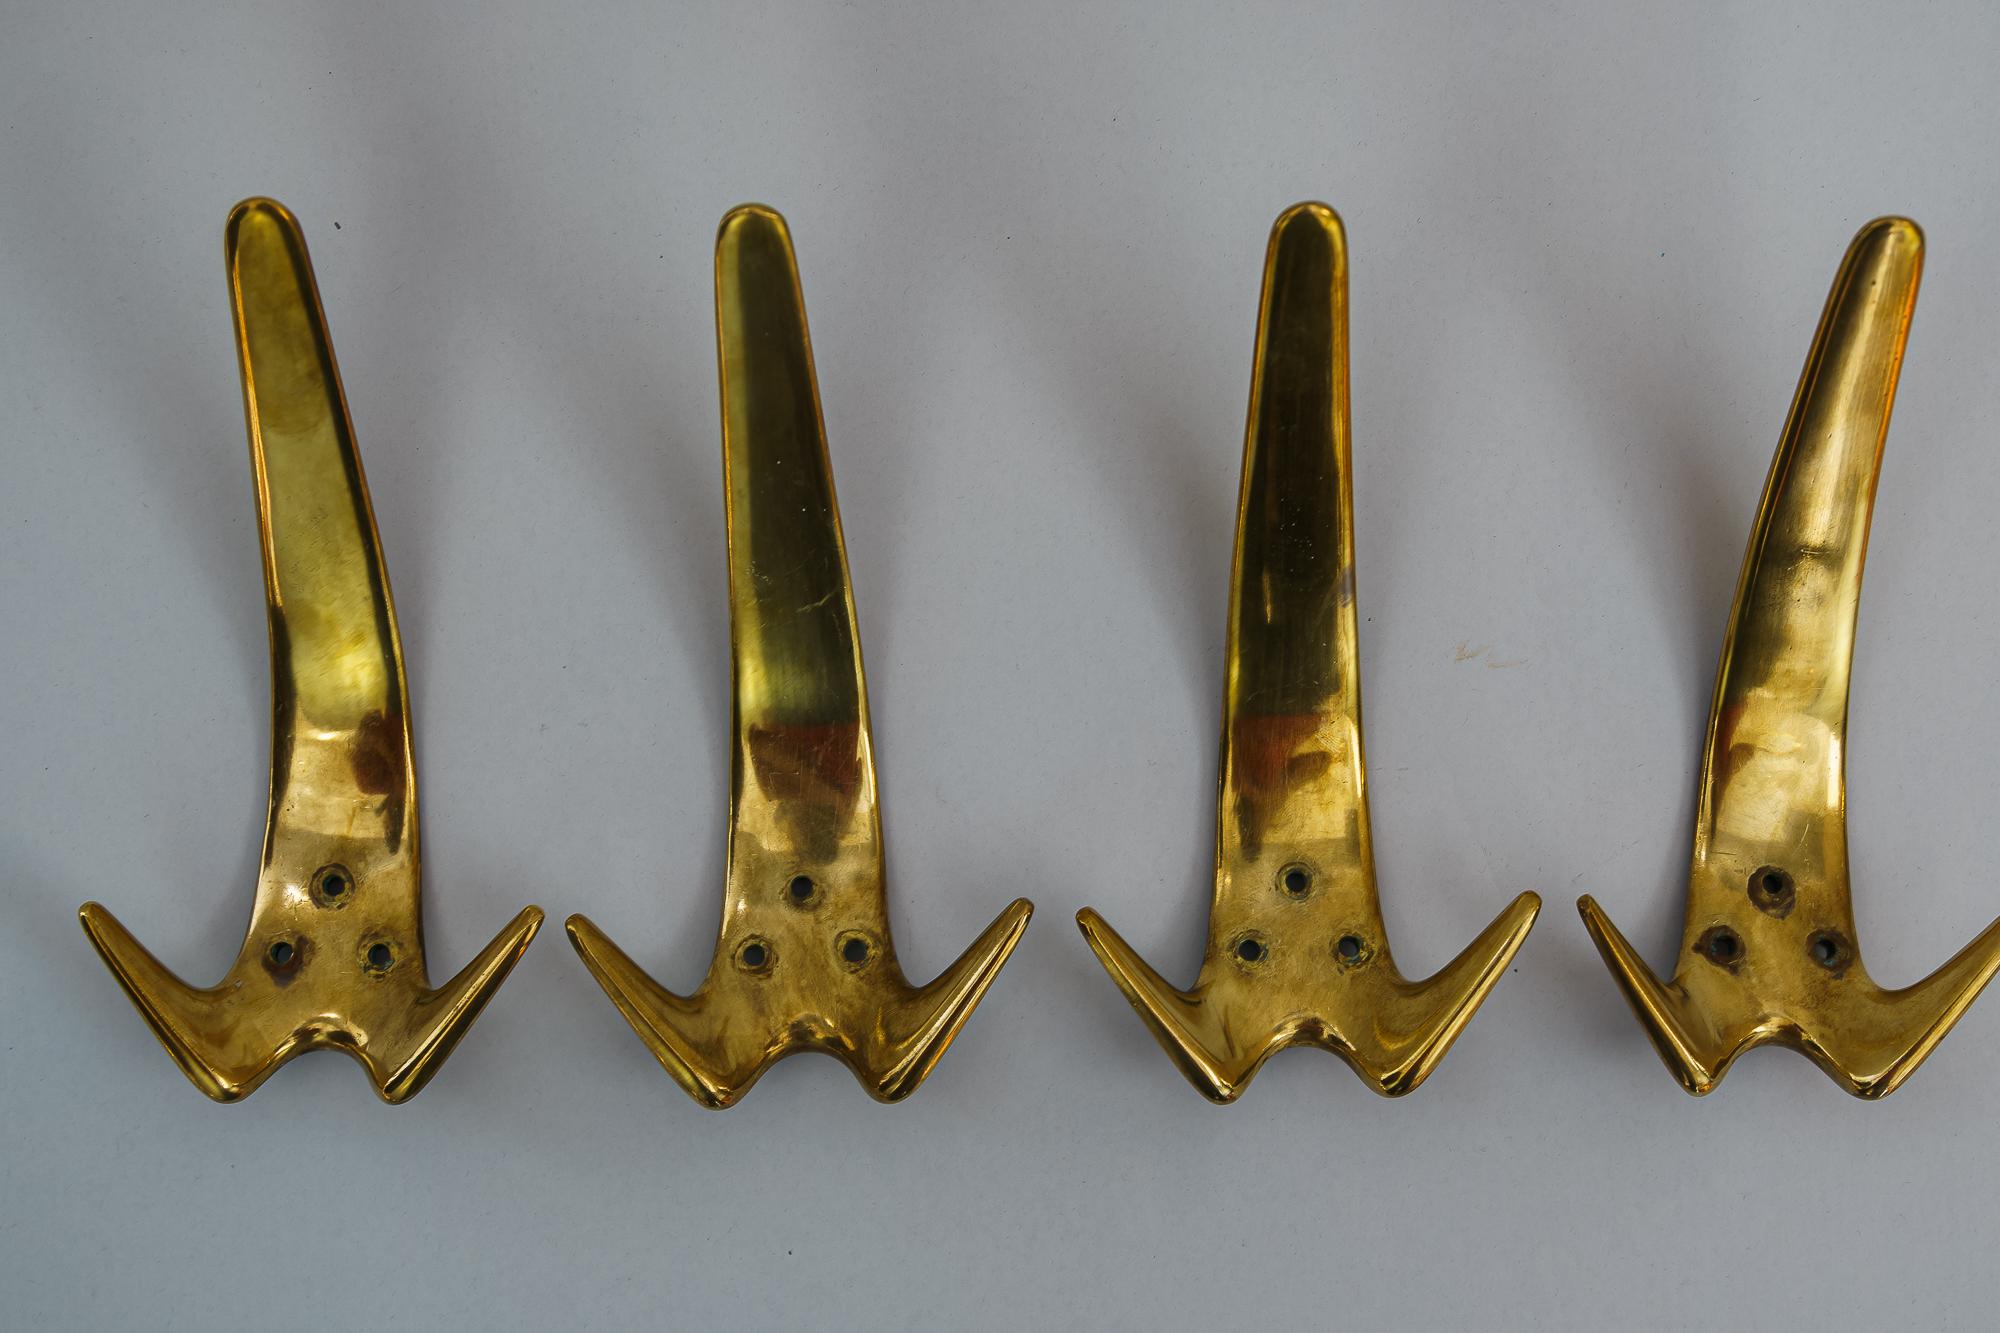 Four charming Auböck wall hooks, circa 1950s
Original condition
Price is for all together.